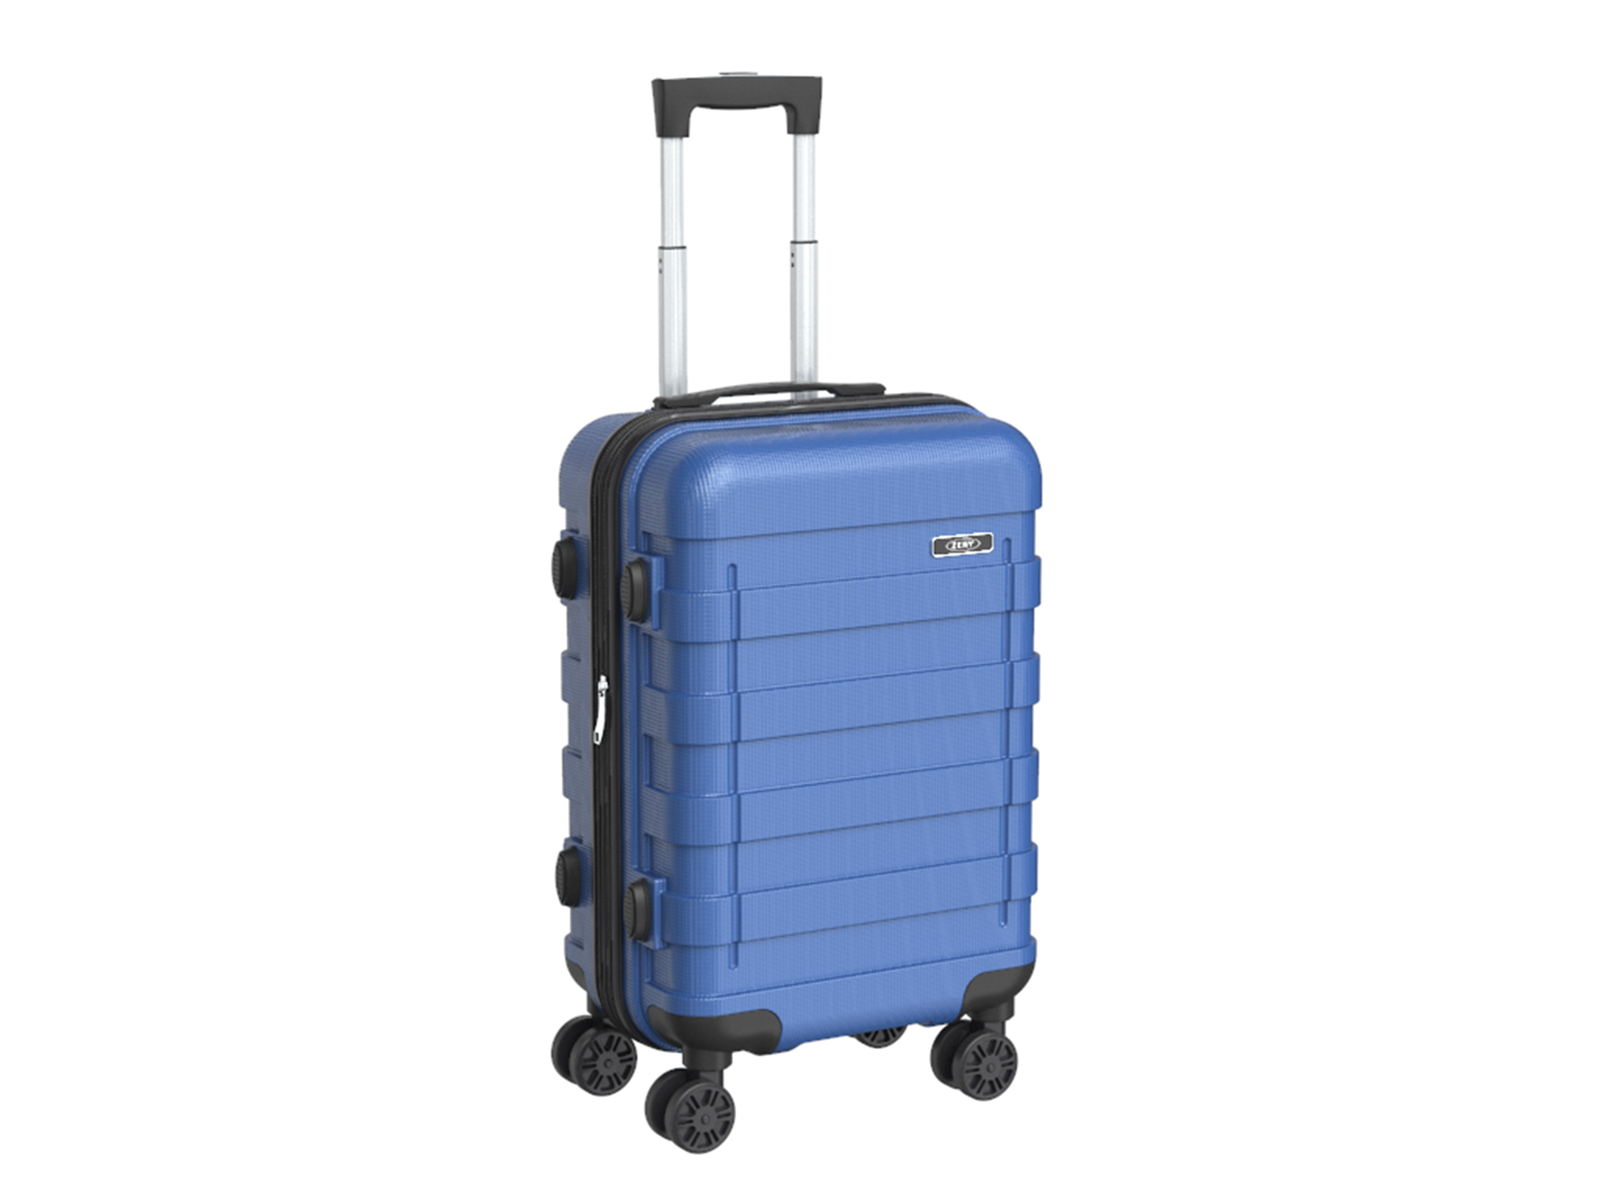 ZENSTYLE 21" Height Expandable Suitcase Luggage with Spinner Navy Blue - Walmart.com